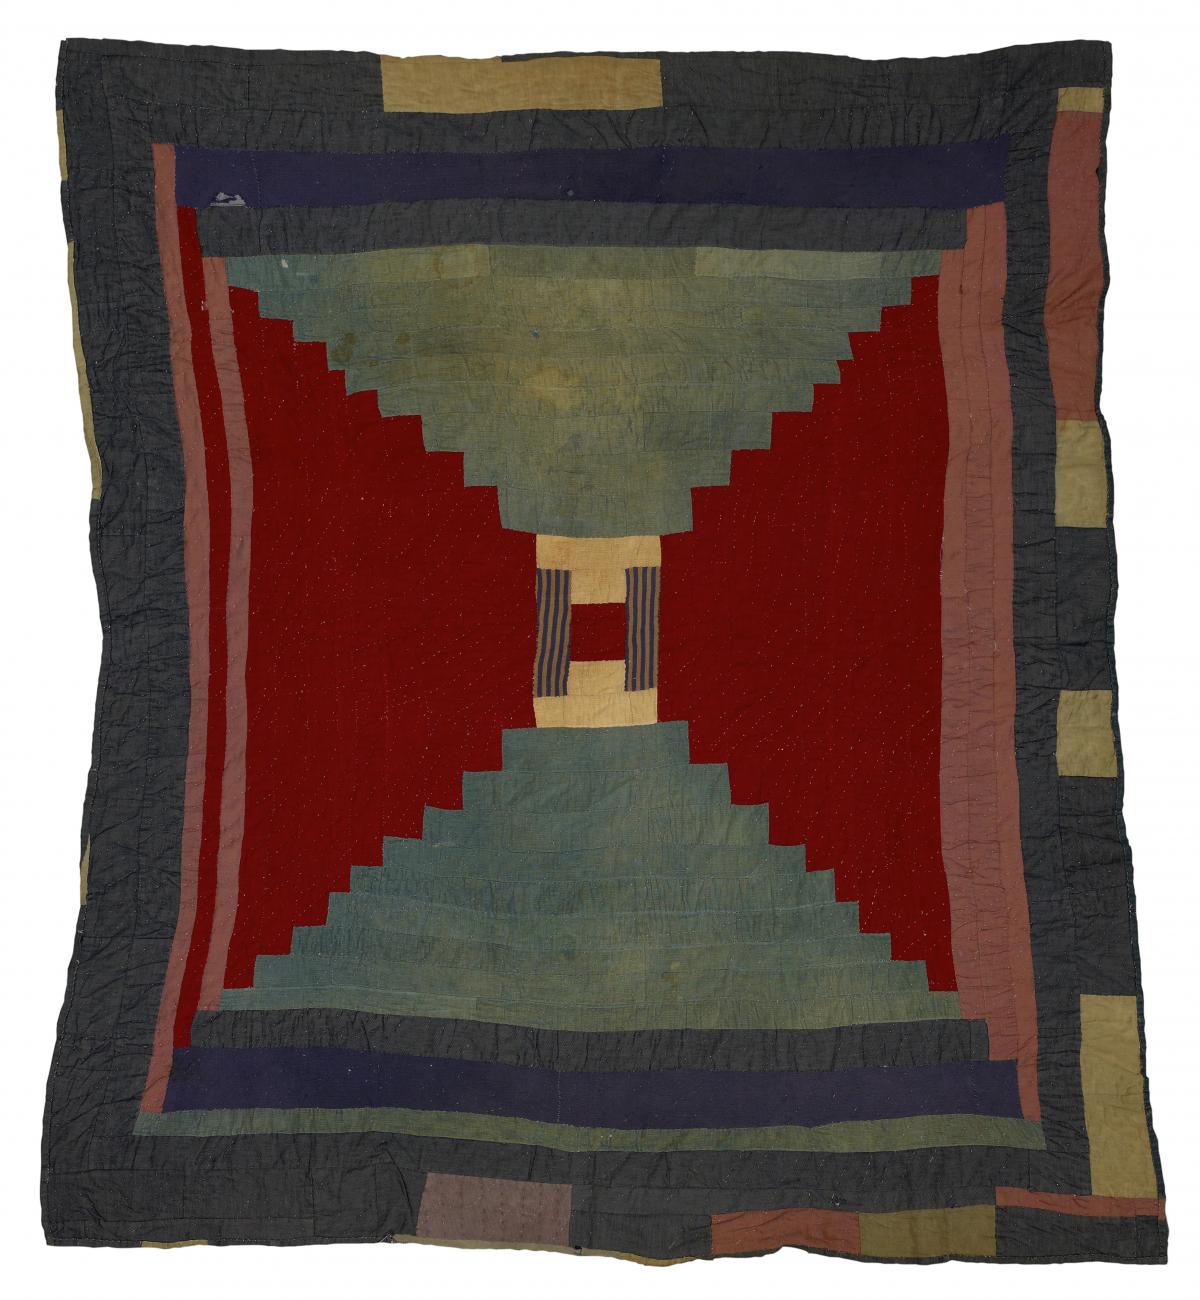 A quilt with red triangles on the sides meeting in the middle, with dark blue border